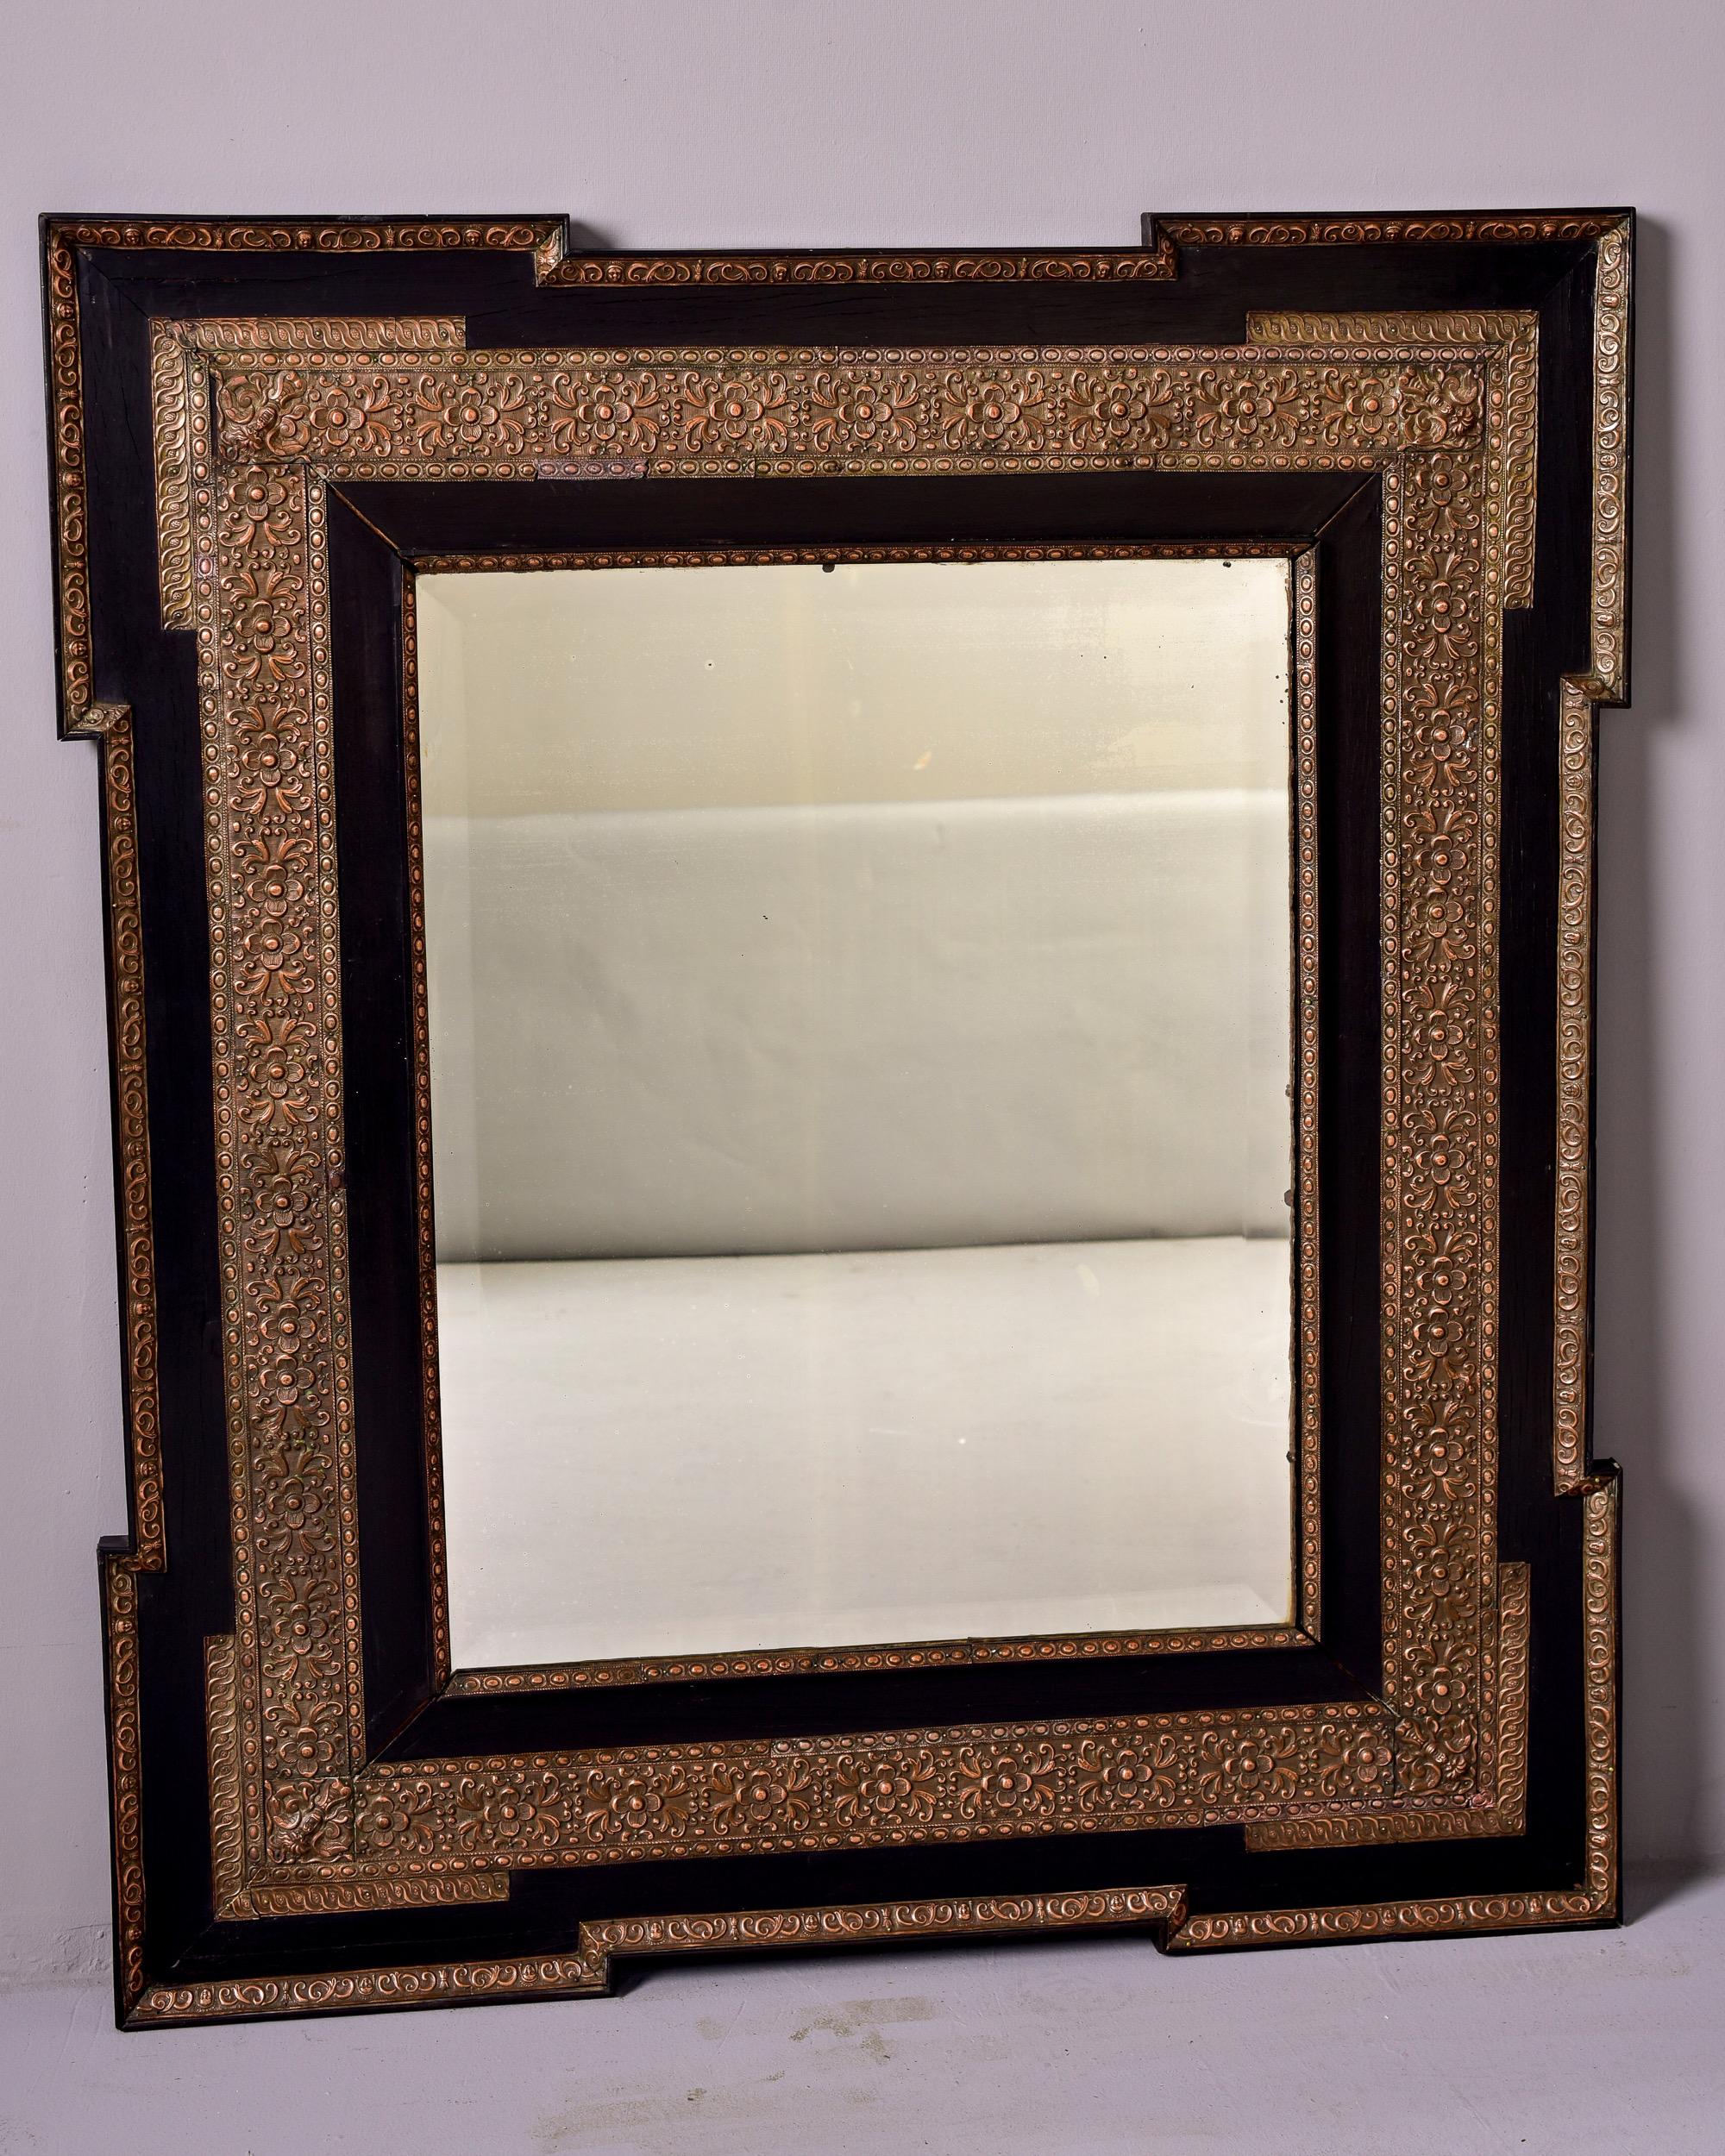 Circa 1880s French mirror with beveled edge in black frame with decorative pressed metal details on inner border and outer edge. Unknown maker.